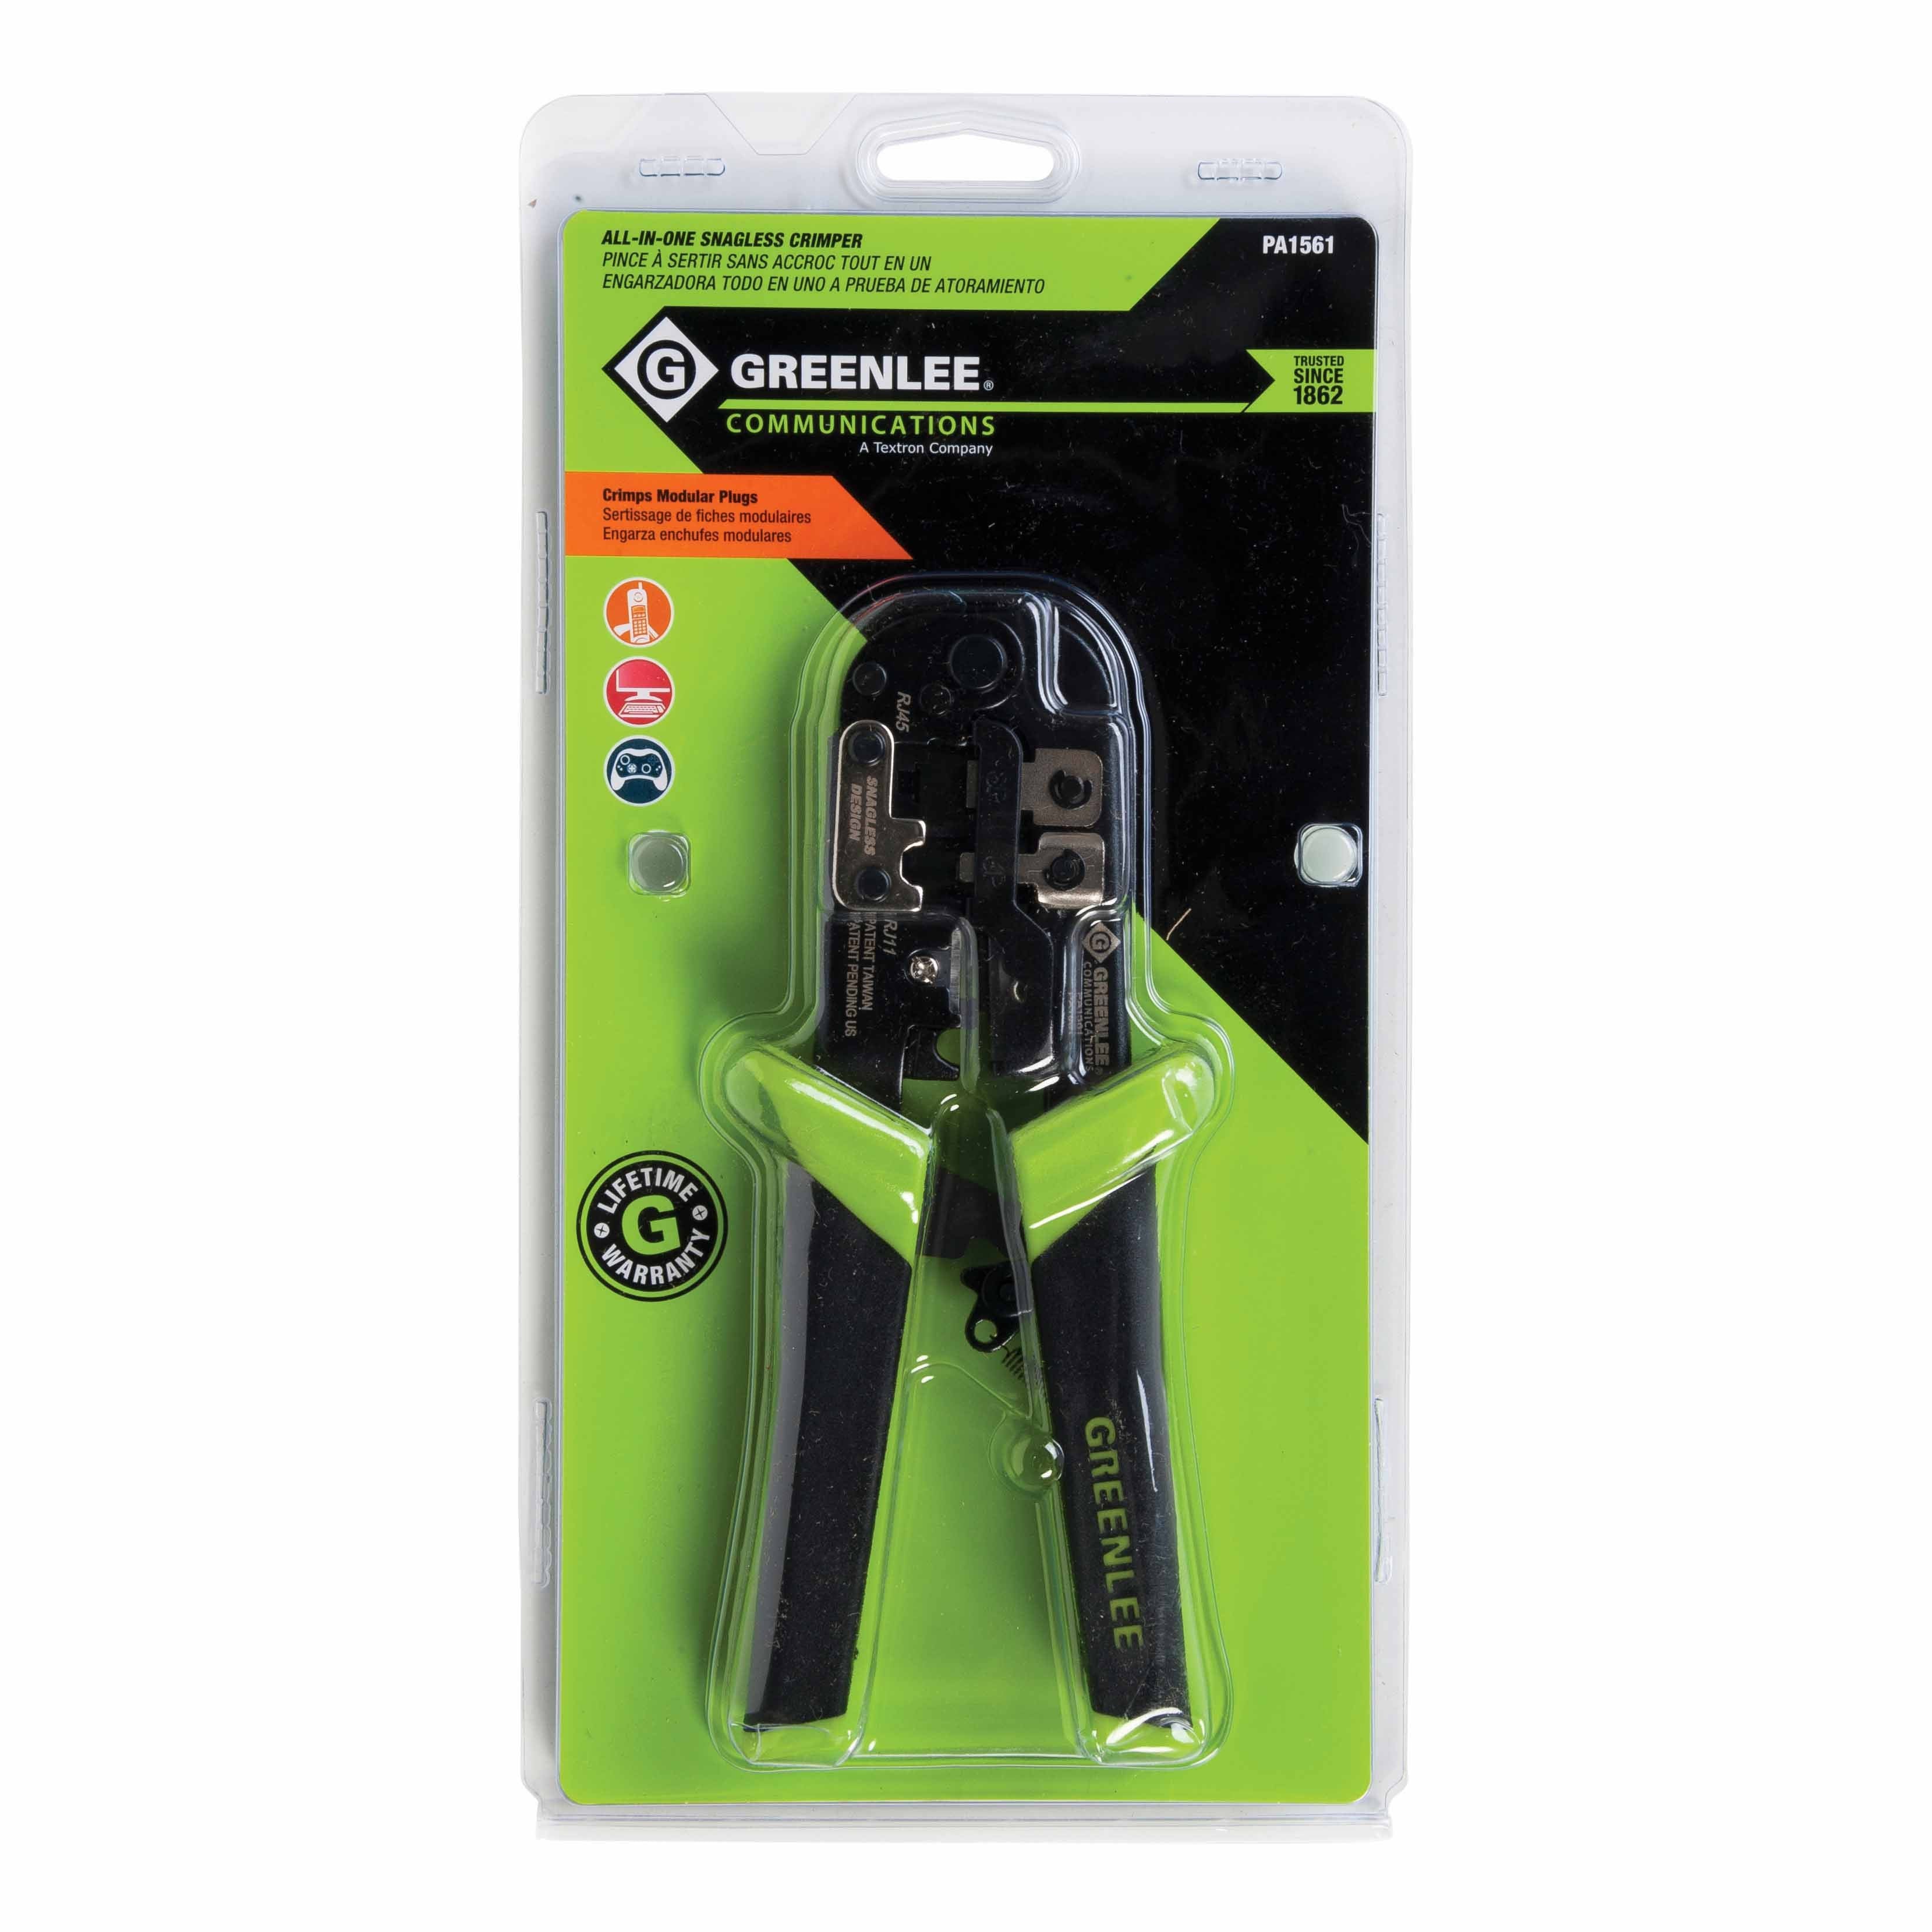 Greenlee PA1561 Snagless All-In-On Crimper